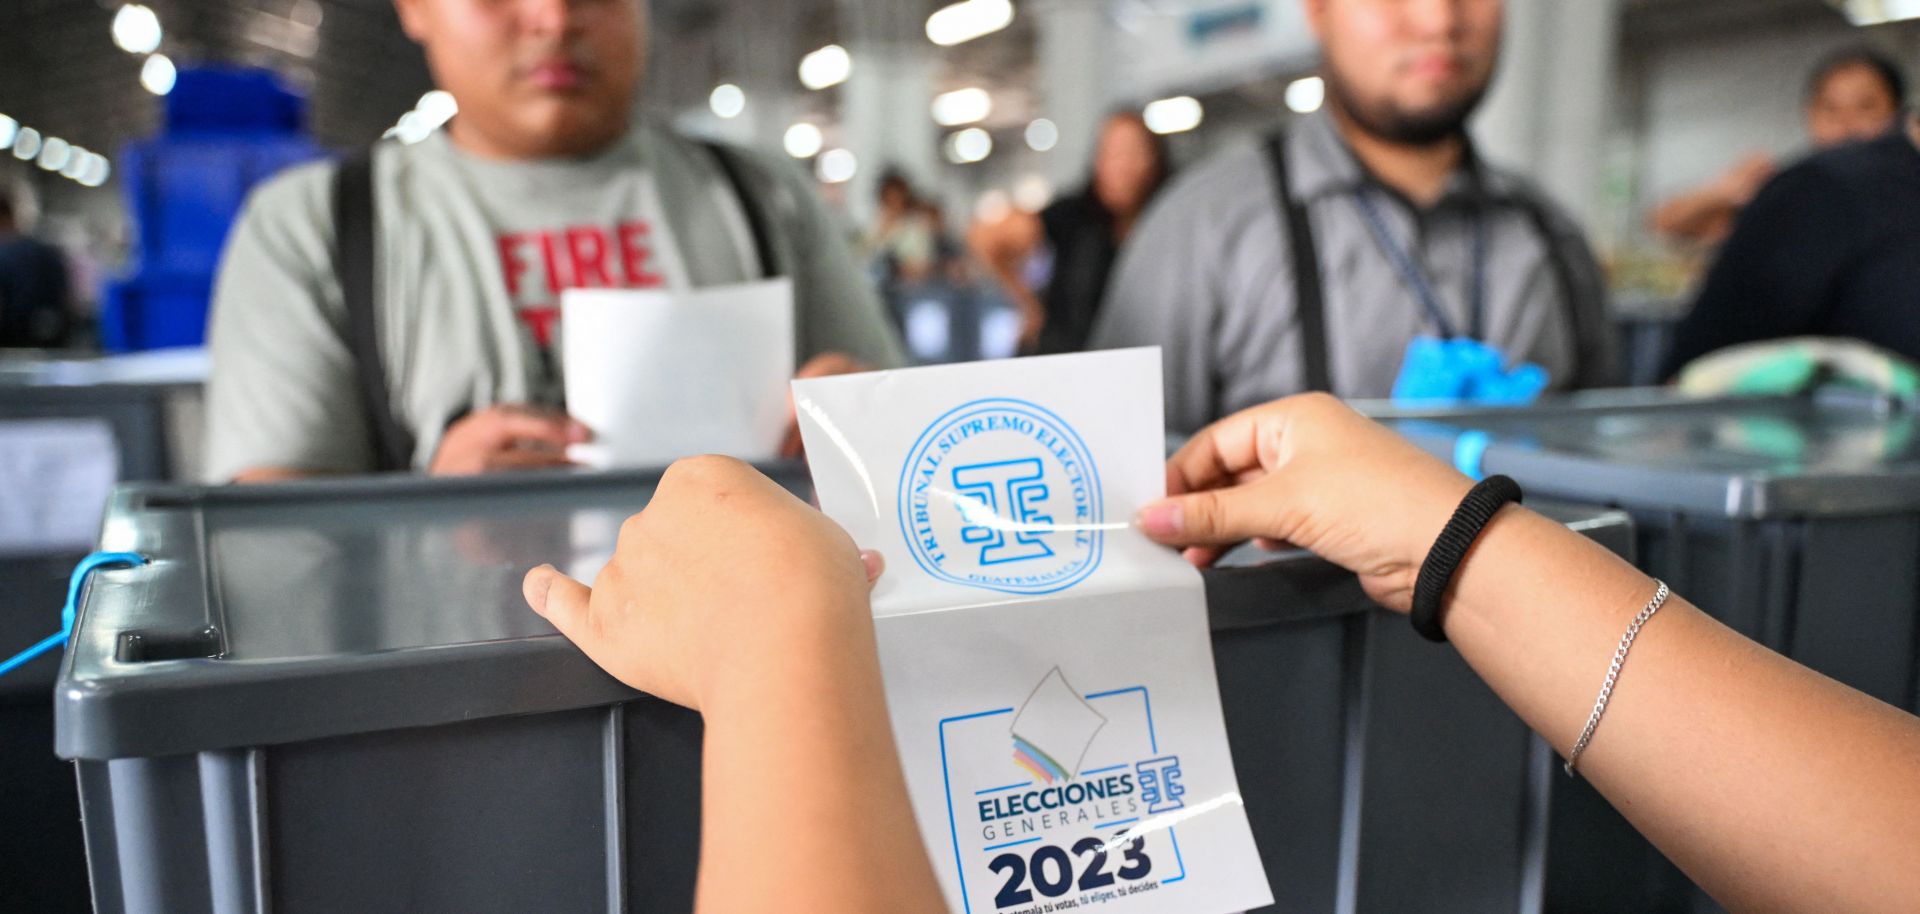 Employees of the Supreme Electoral Tribunal on June 20, 2023, arrange ballots in Guatemala City during preparations for the upcoming general elections.